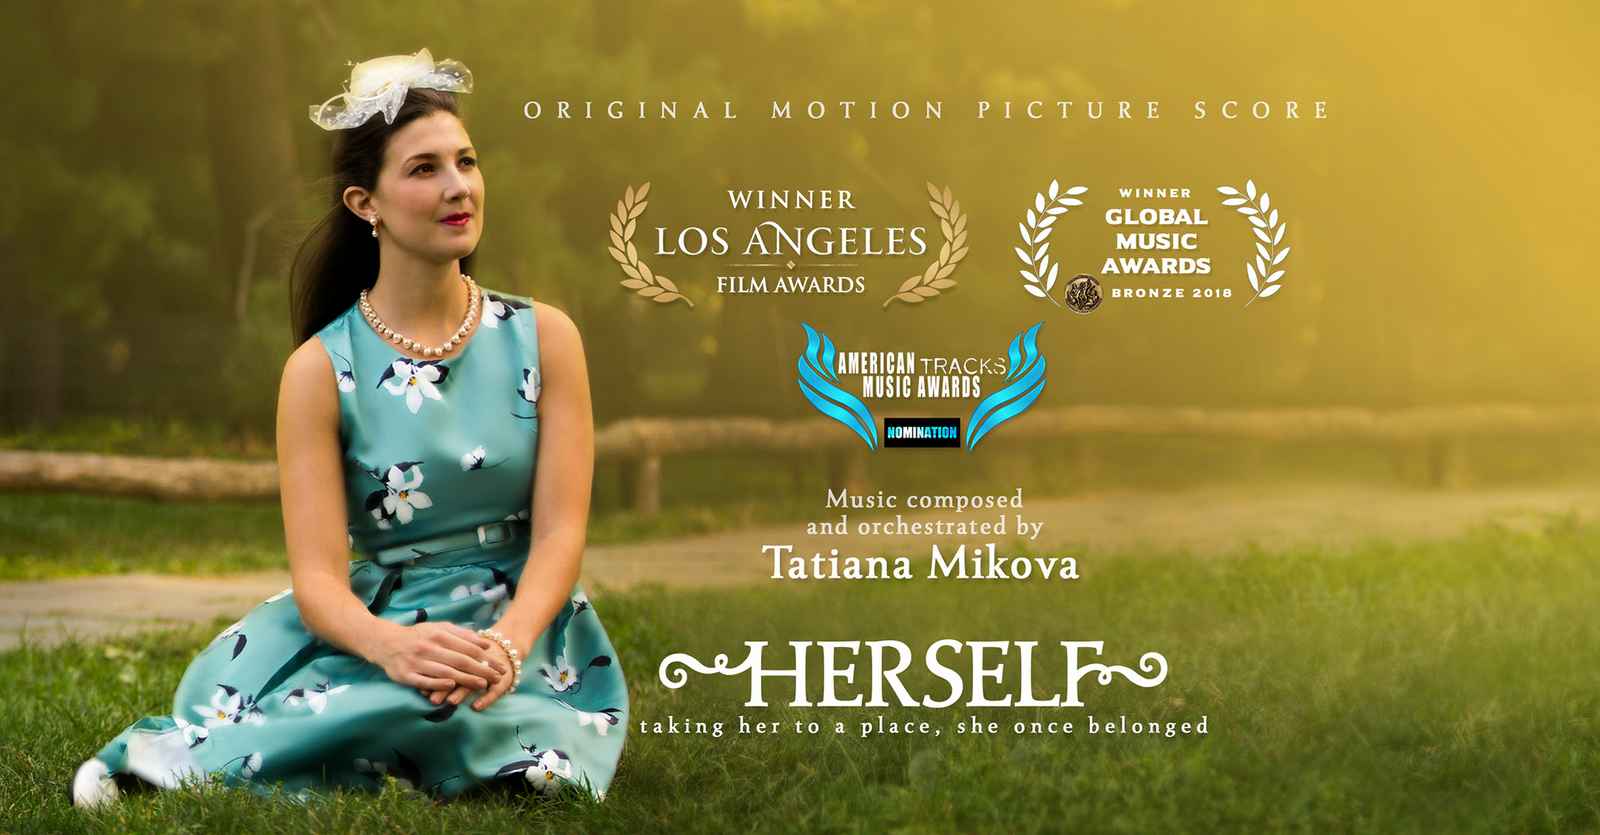 Tatiana Mikova won the Los Angeles Film Award for her score for the film 'Herself'.